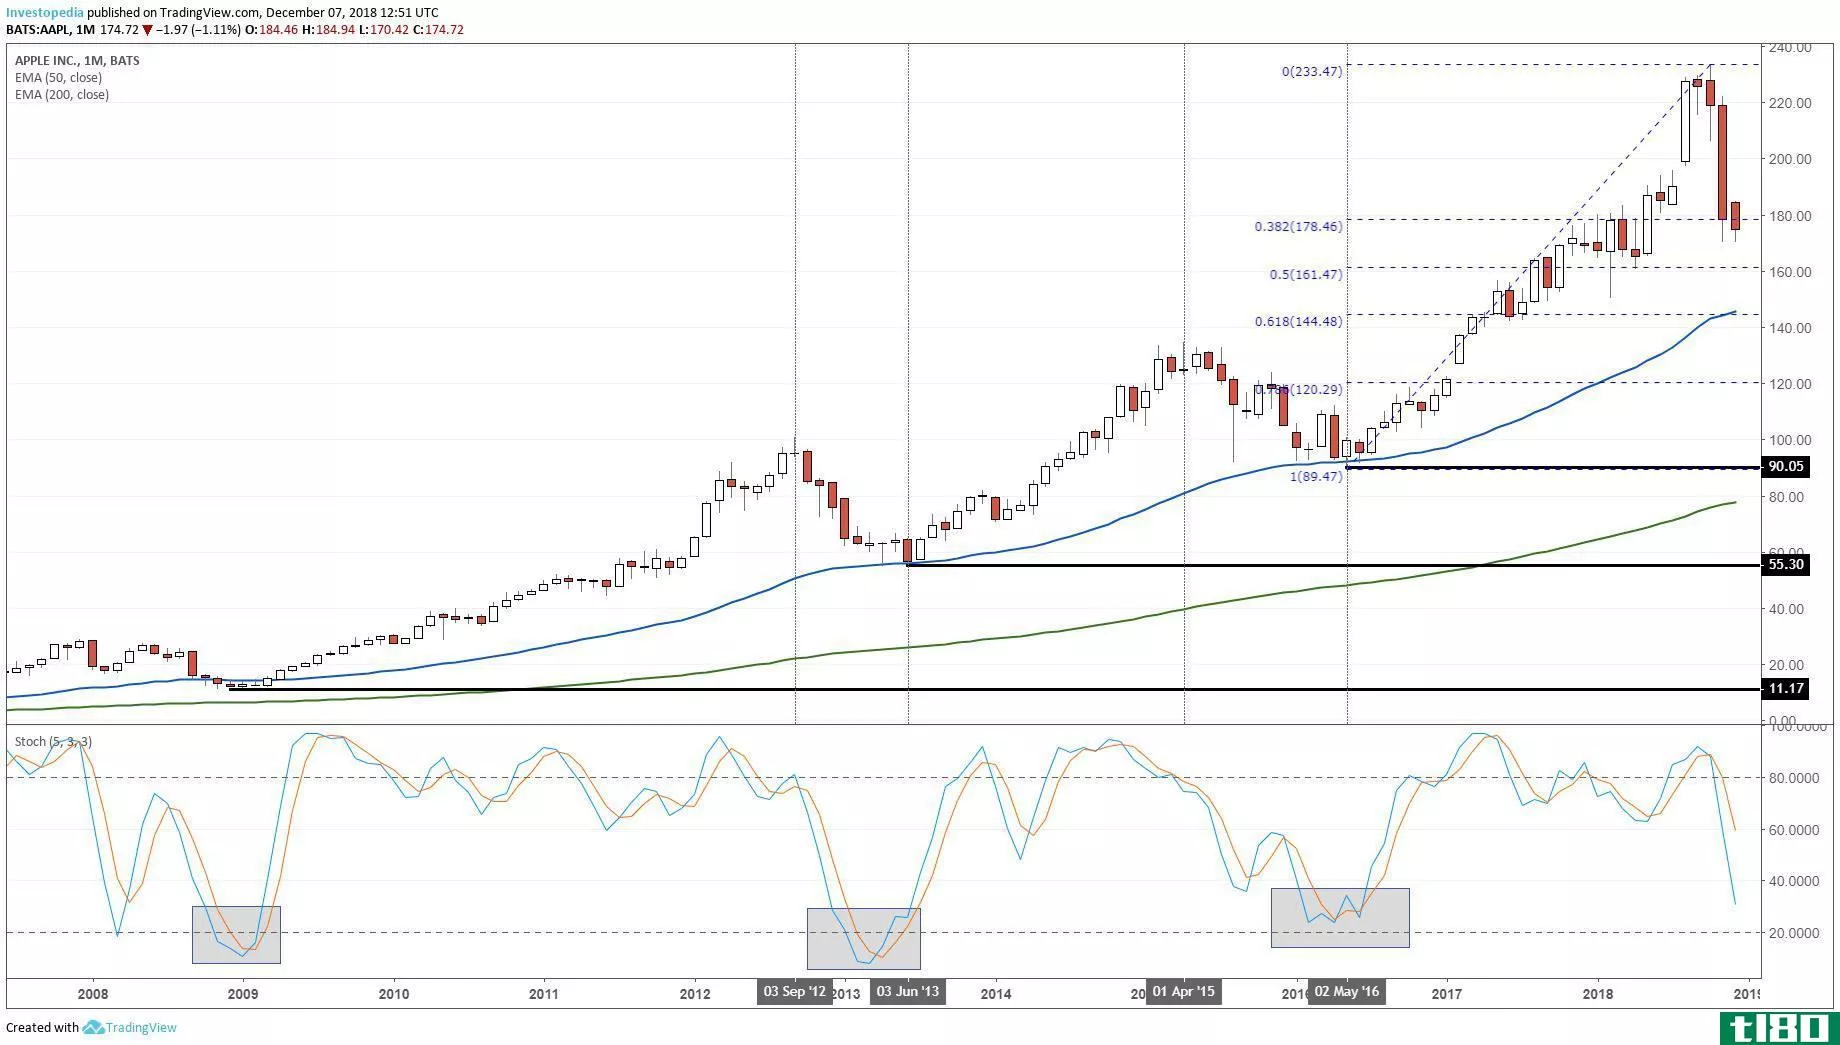 Technical chart showing the performance of Apple Inc. (AAPL) stock